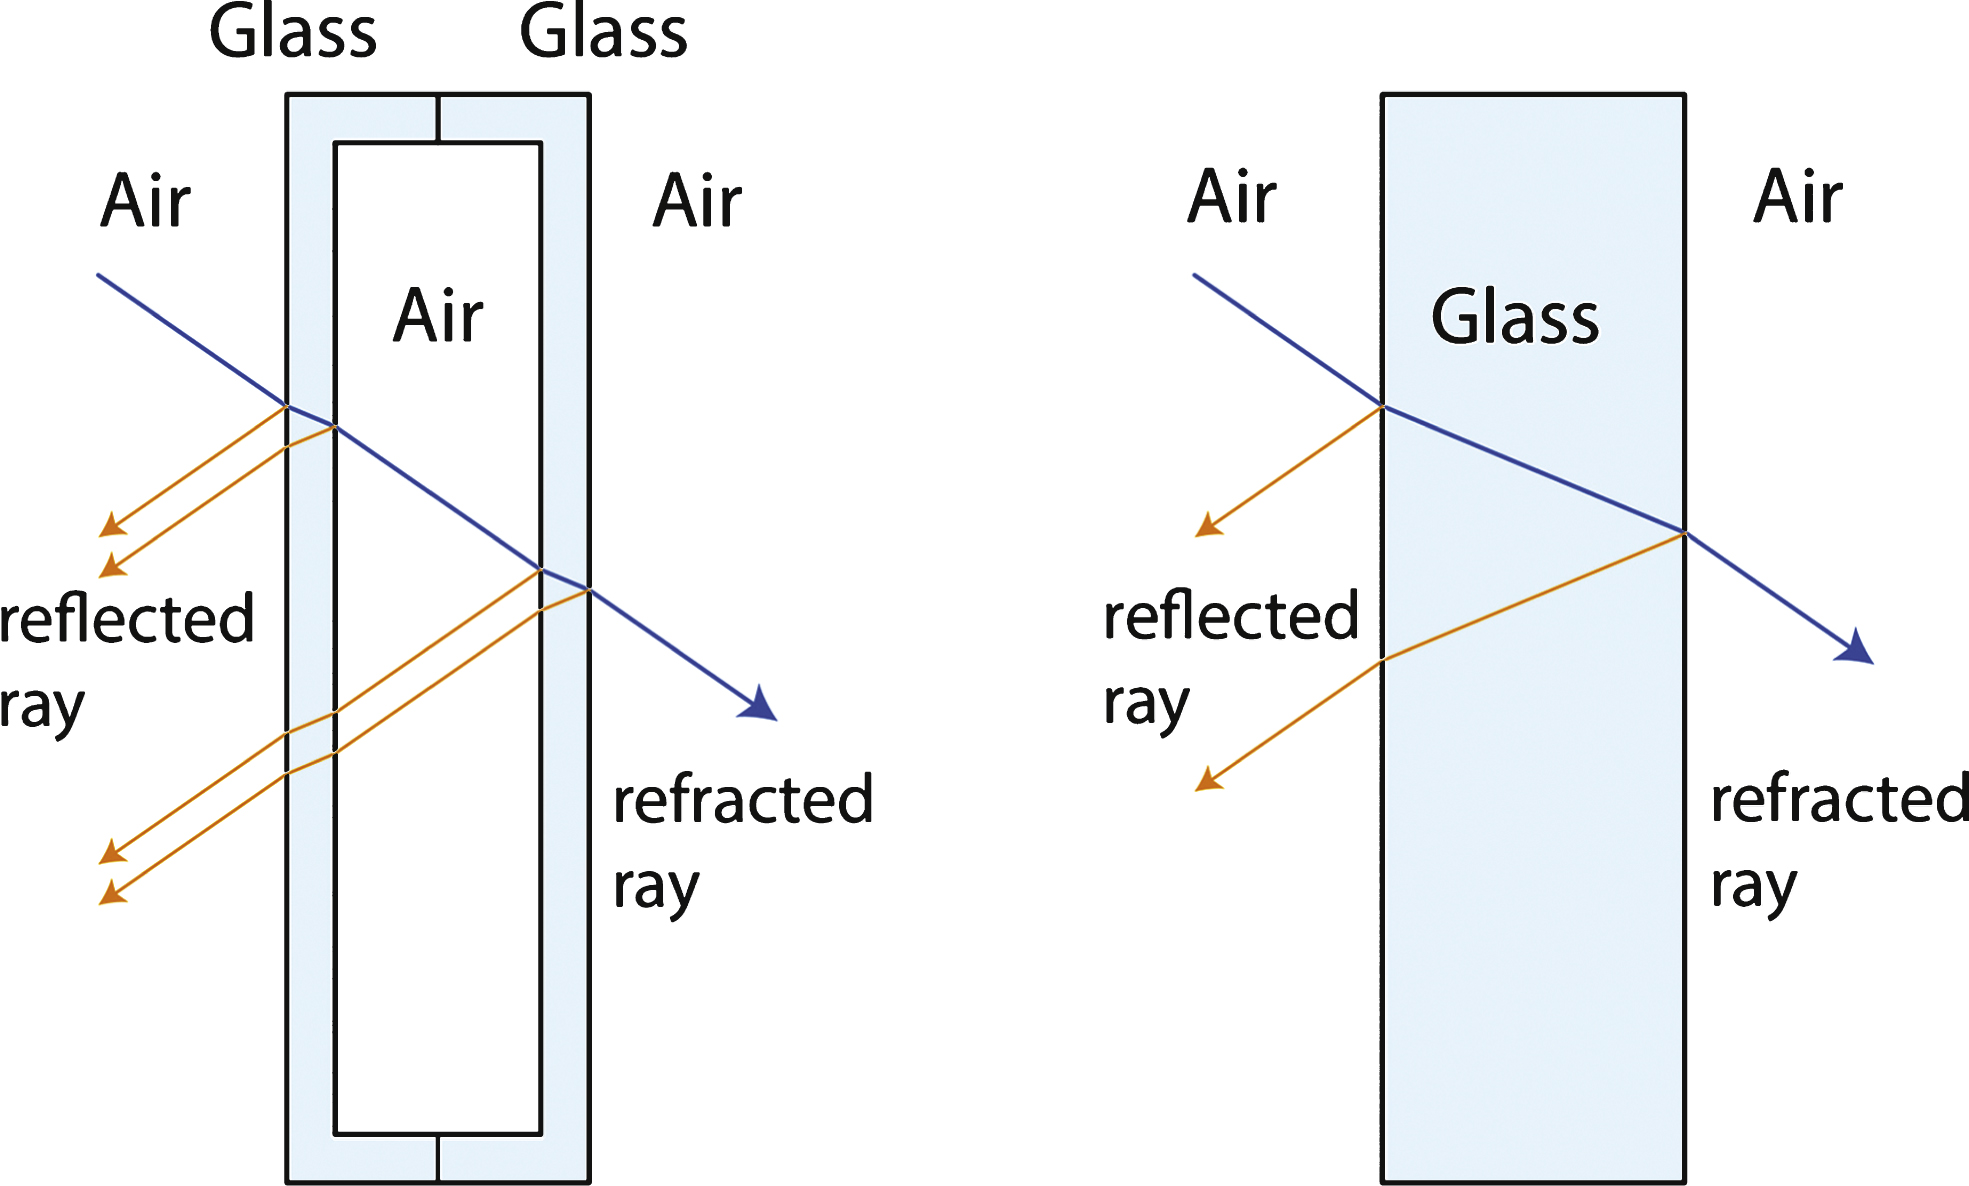 The transition of the light rays through multiple media in a hollow glass block results in much more distortion compared to a solid glass block.